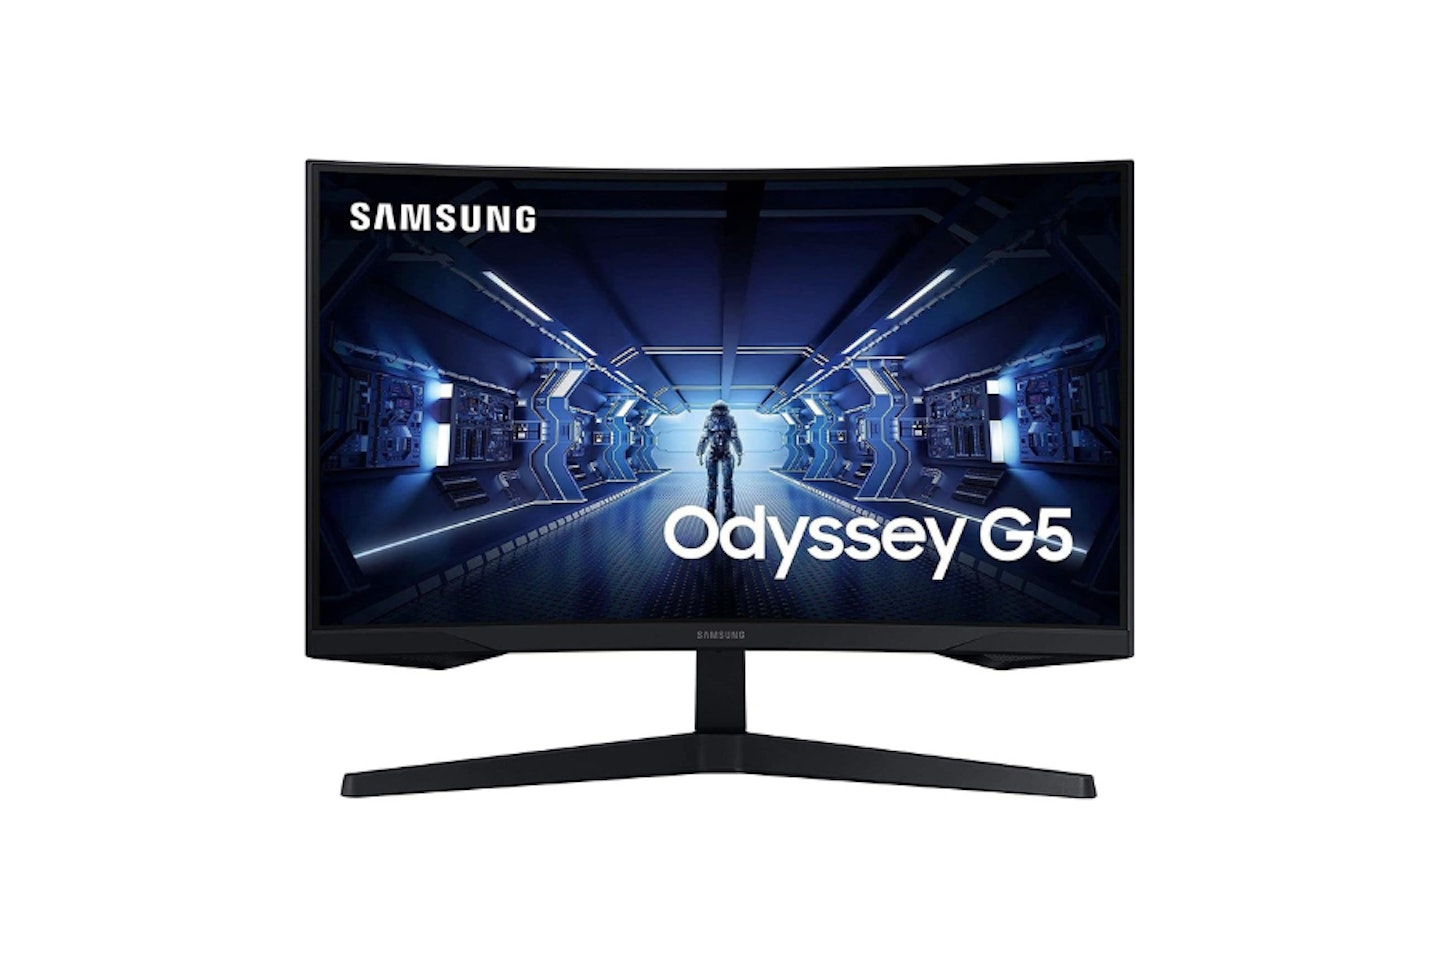 Samsung Odyssey G5 Curved Gaming Monitor